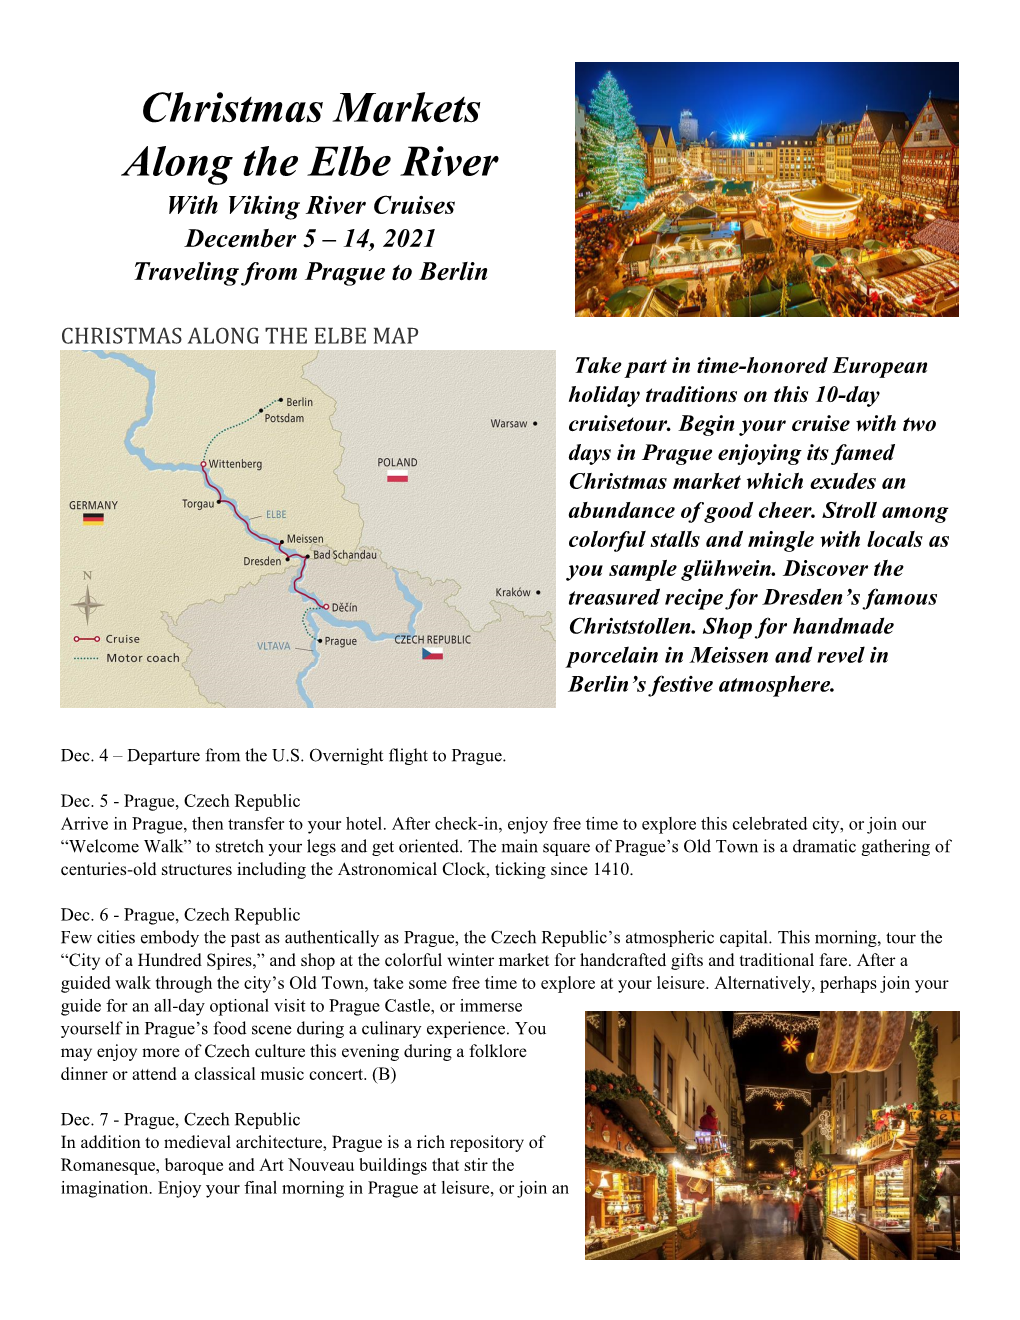 Christmas Markets Along the Elbe River with Viking River Cruises December 5 – 14, 2021 Traveling from Prague to Berlin